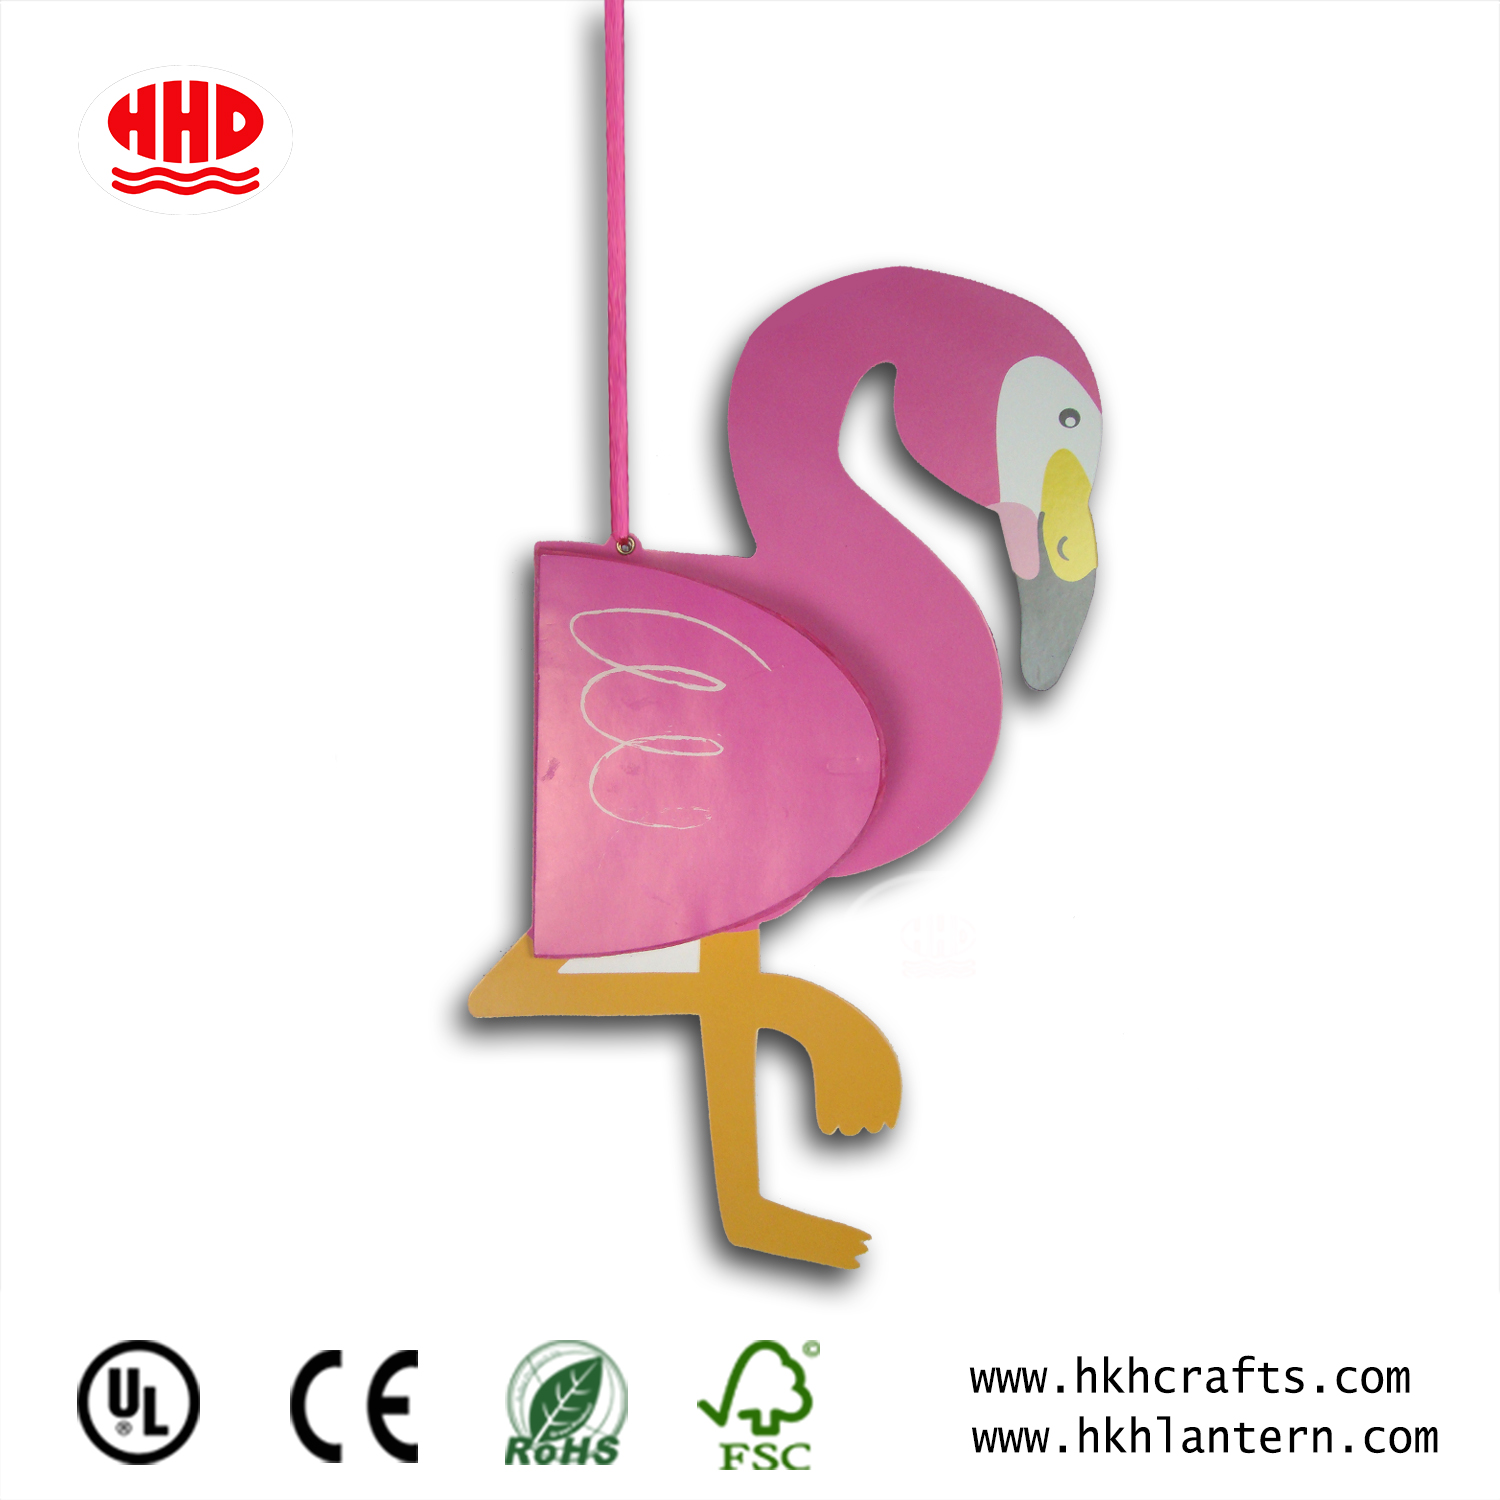 Flamingo paper honeycomb for Christmas party hanging decoration